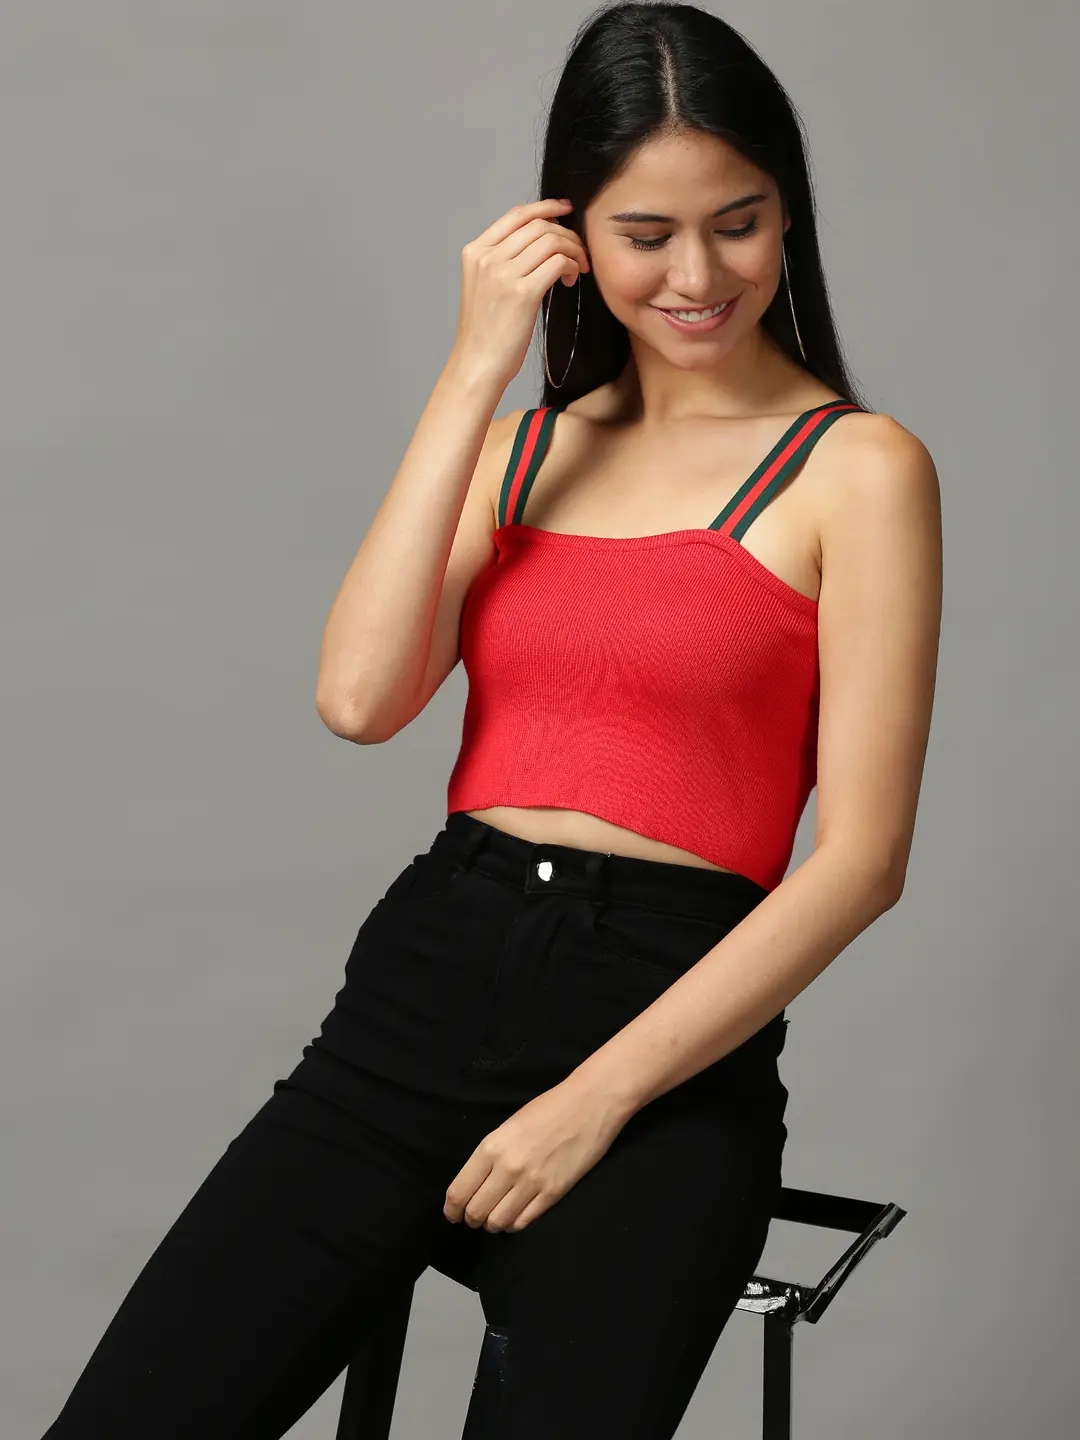 SHOWOFF Women's Shoulder Straps Fitted Solid Red Crop Top